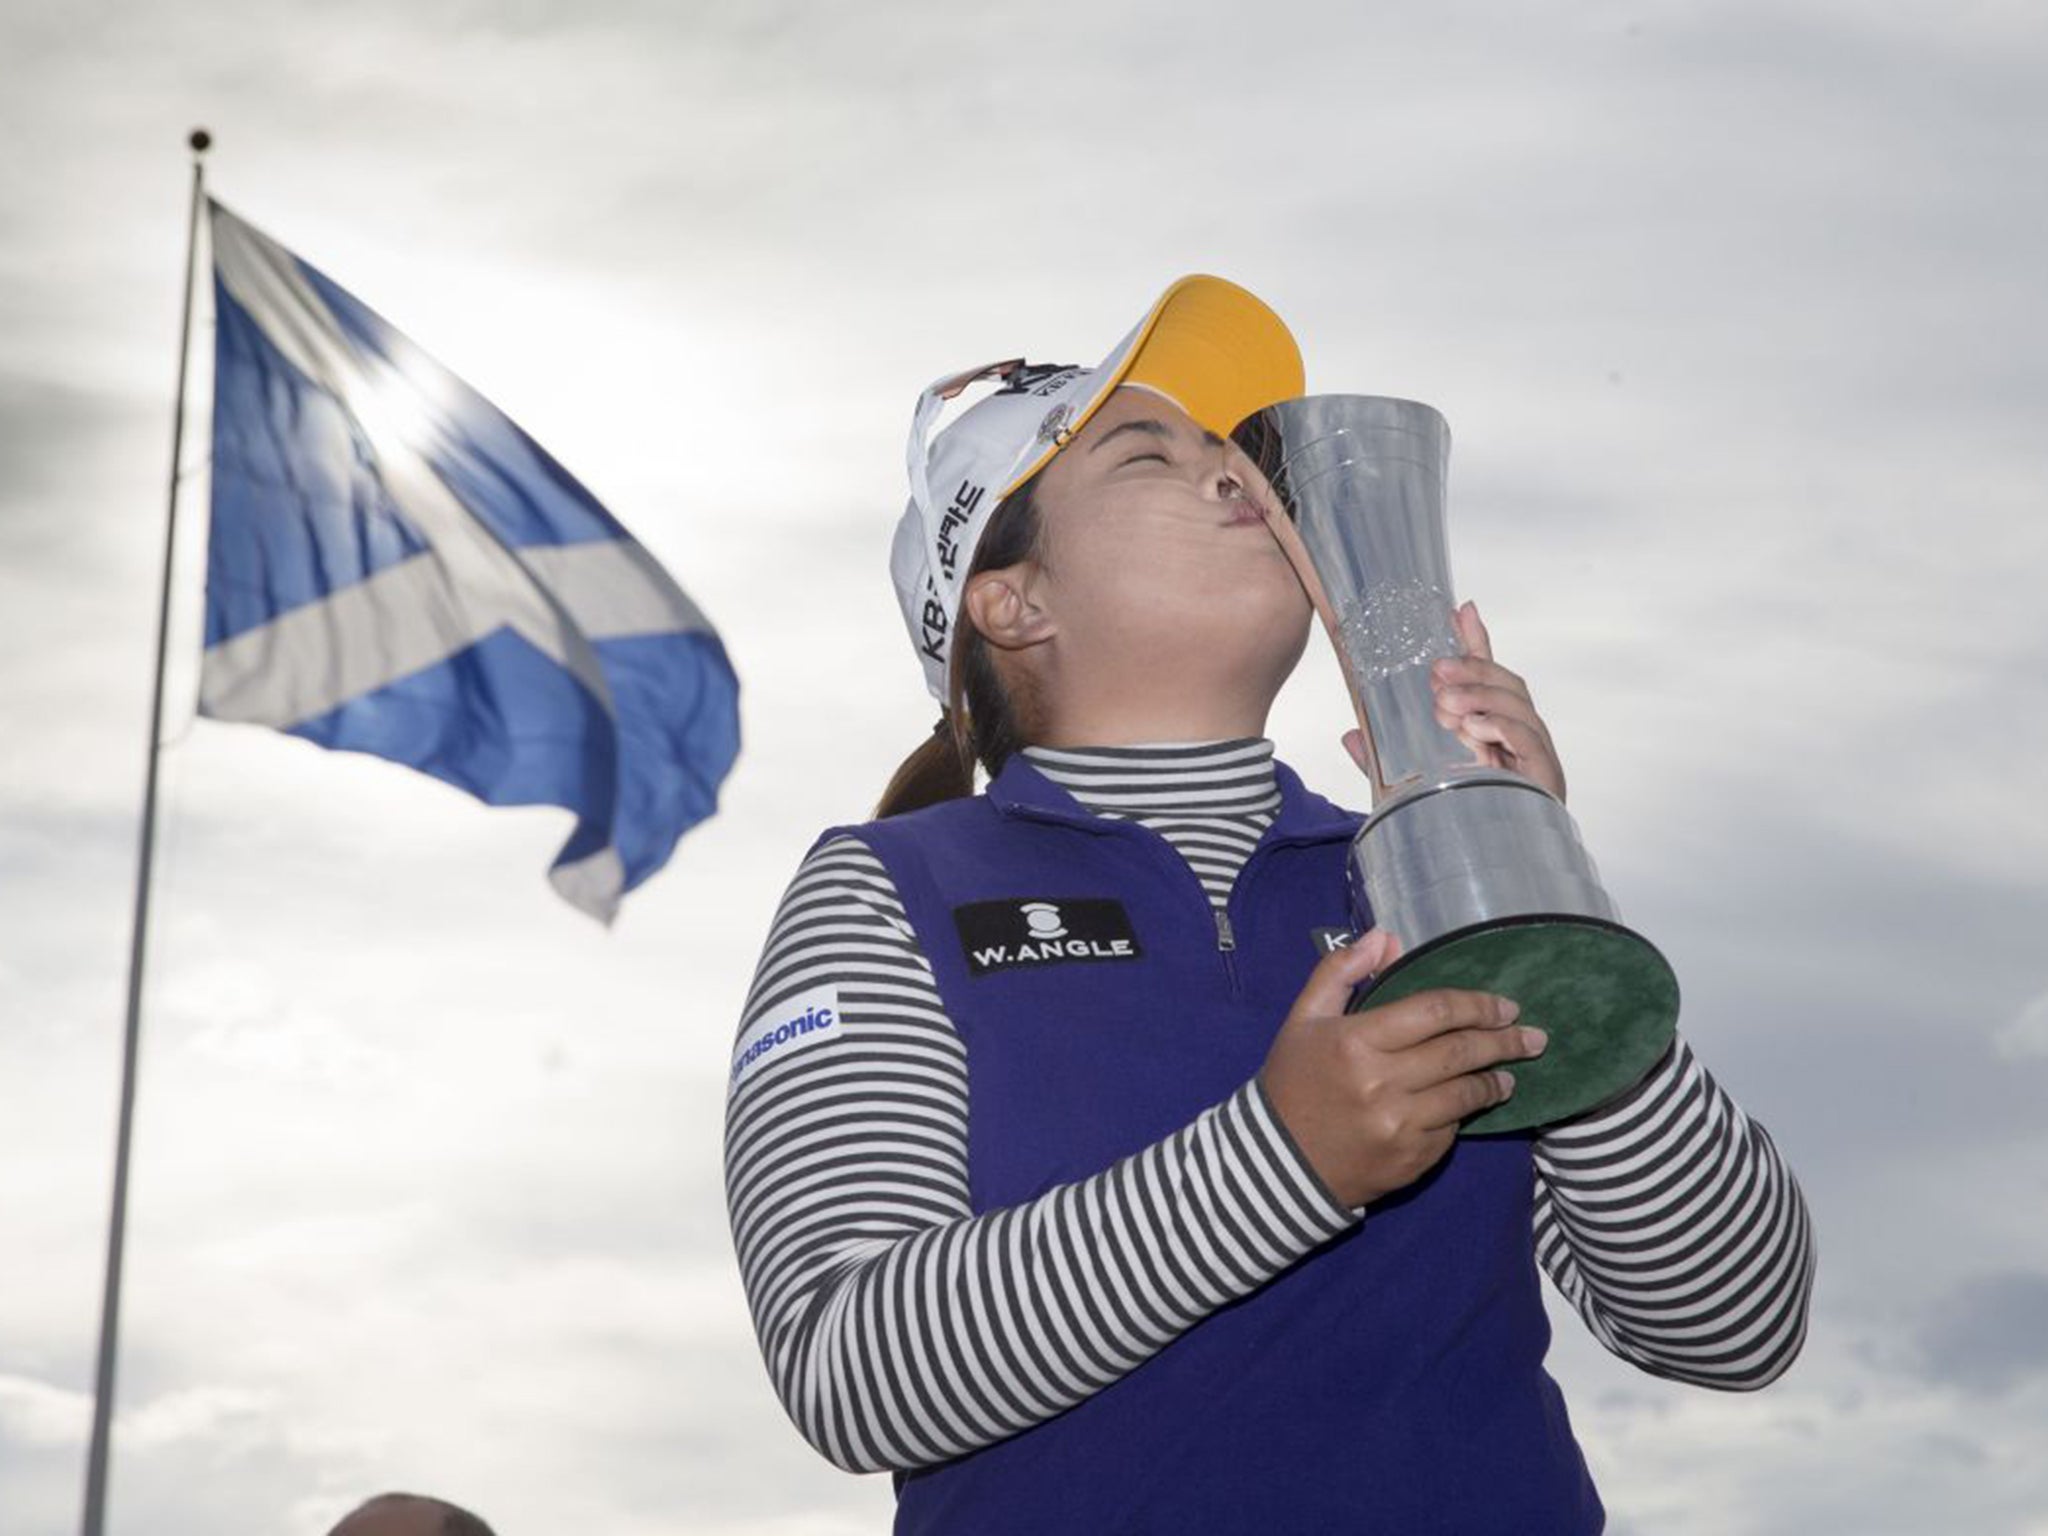 Inbee Park saw off the challenge of fellow South Korean Ko Jin-young to win the Open at Turnberry